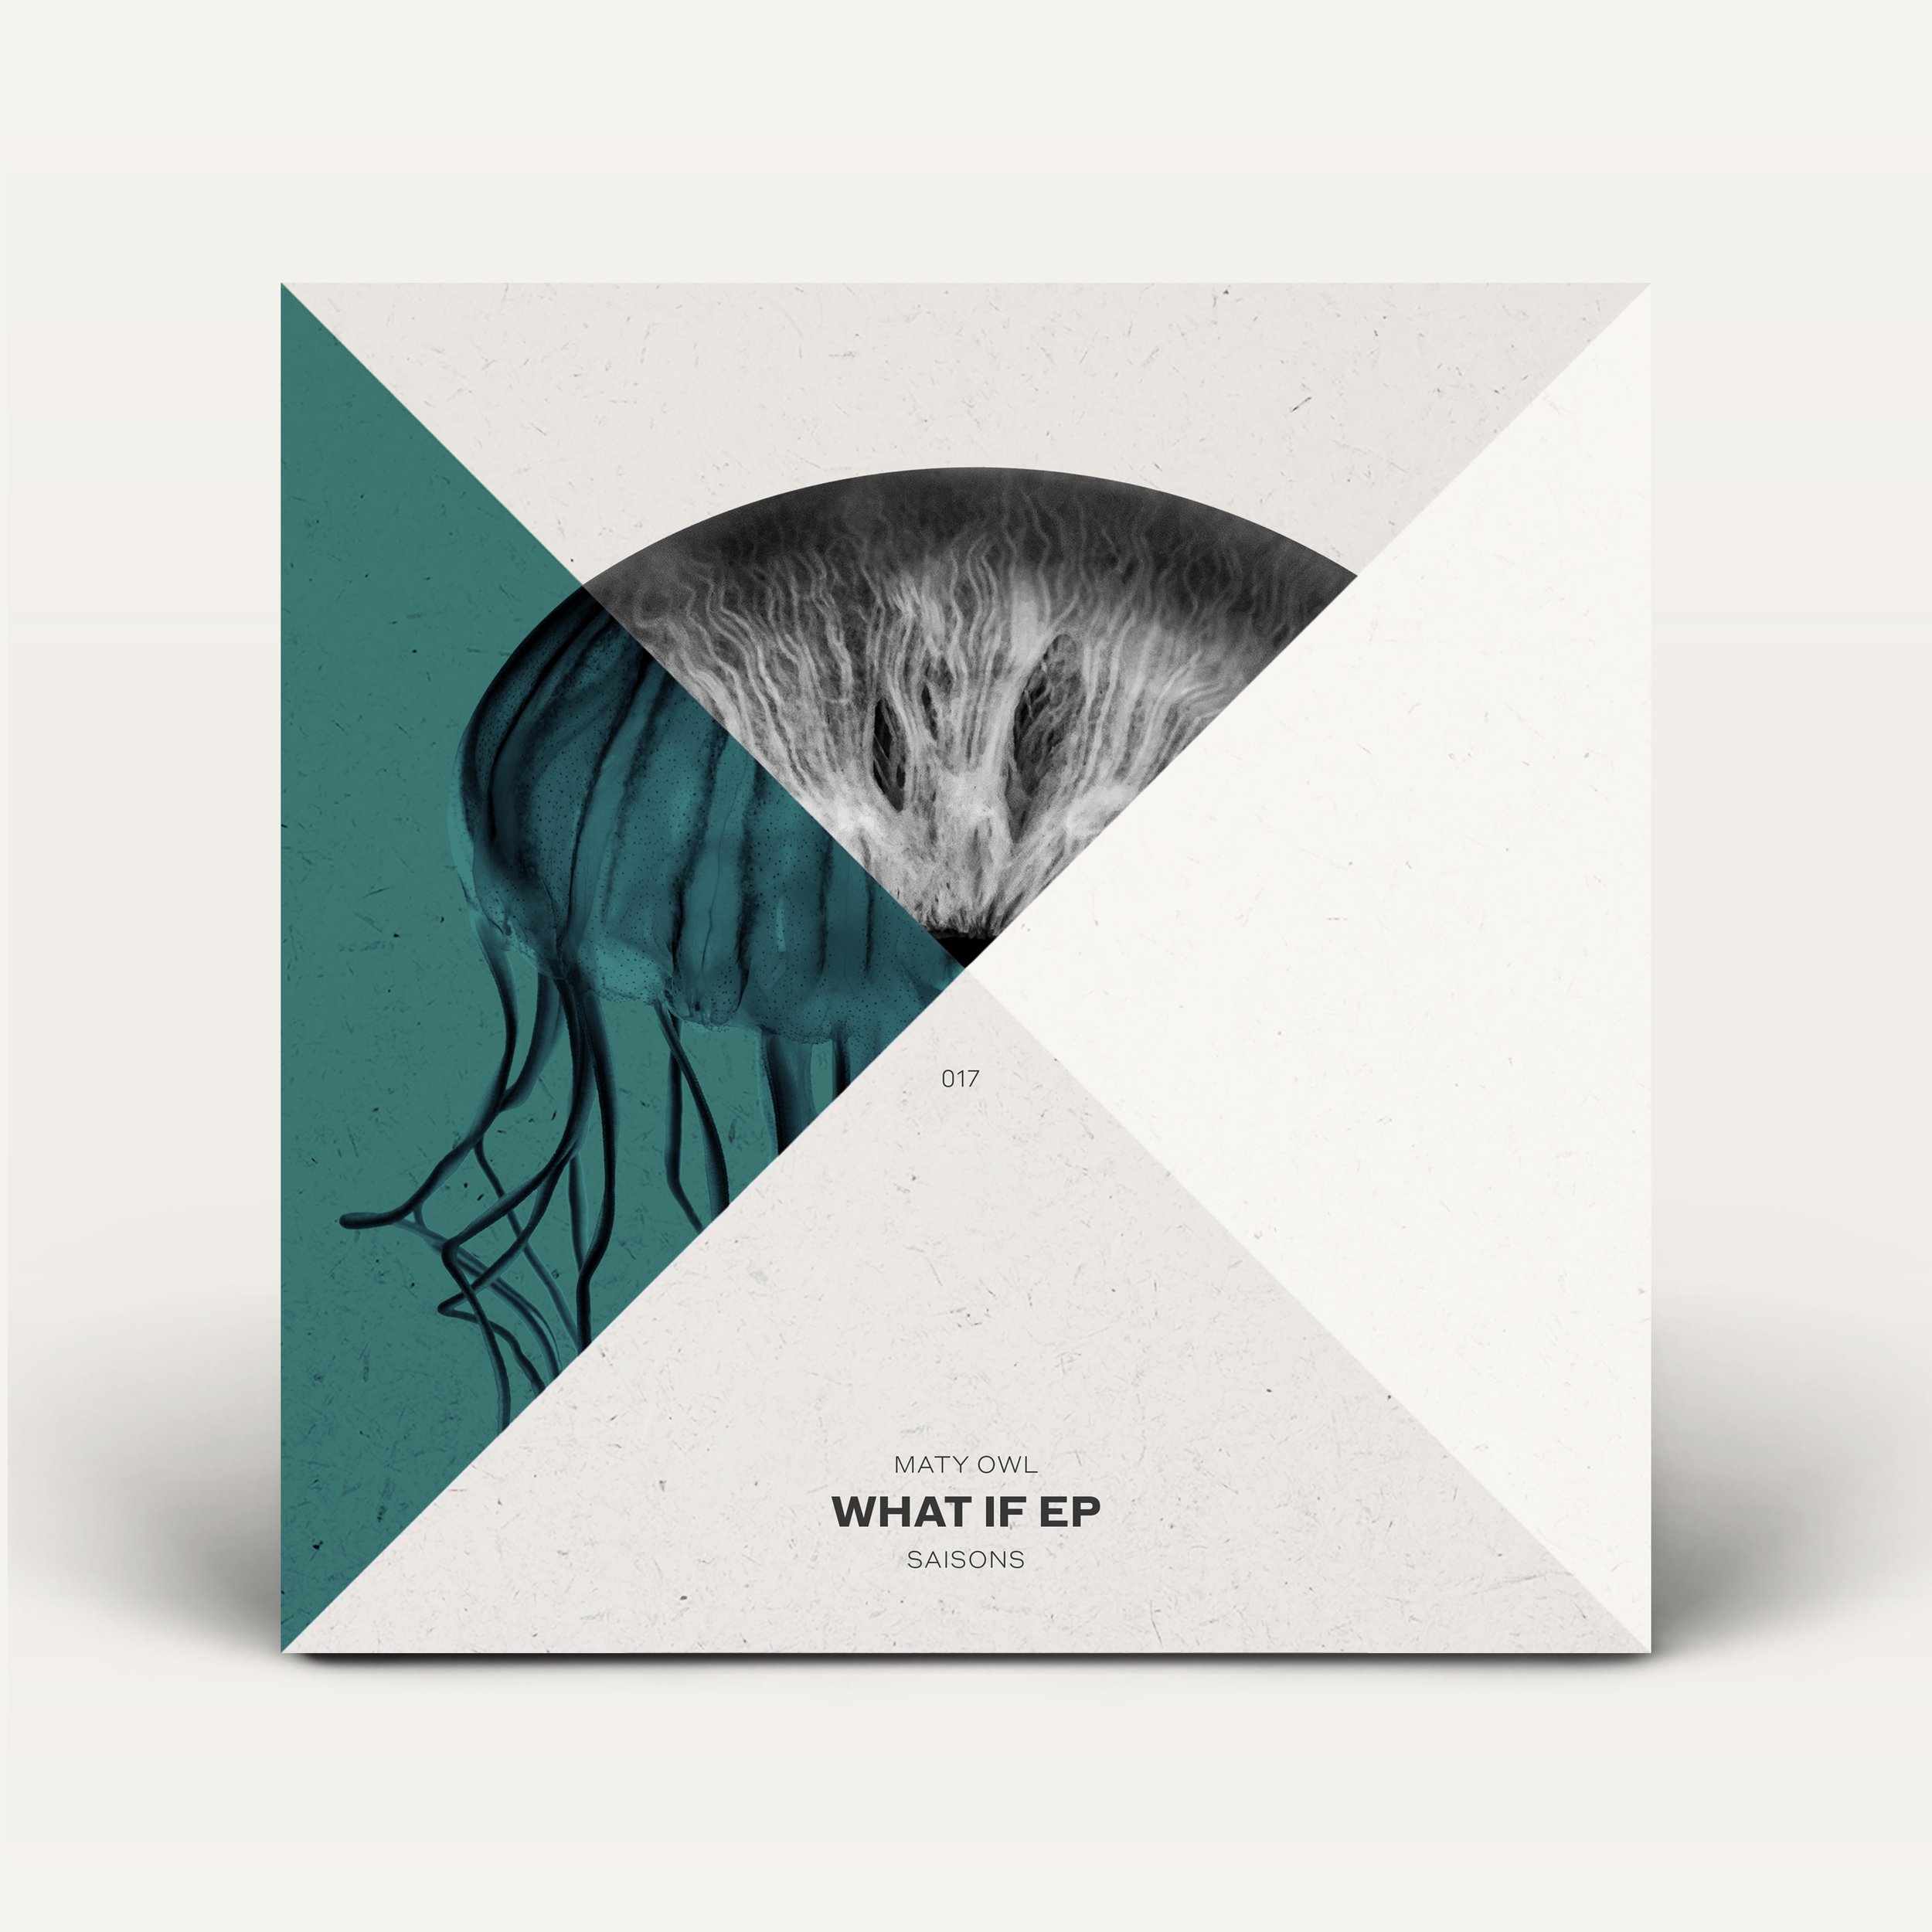 Maty Owl - What If EP